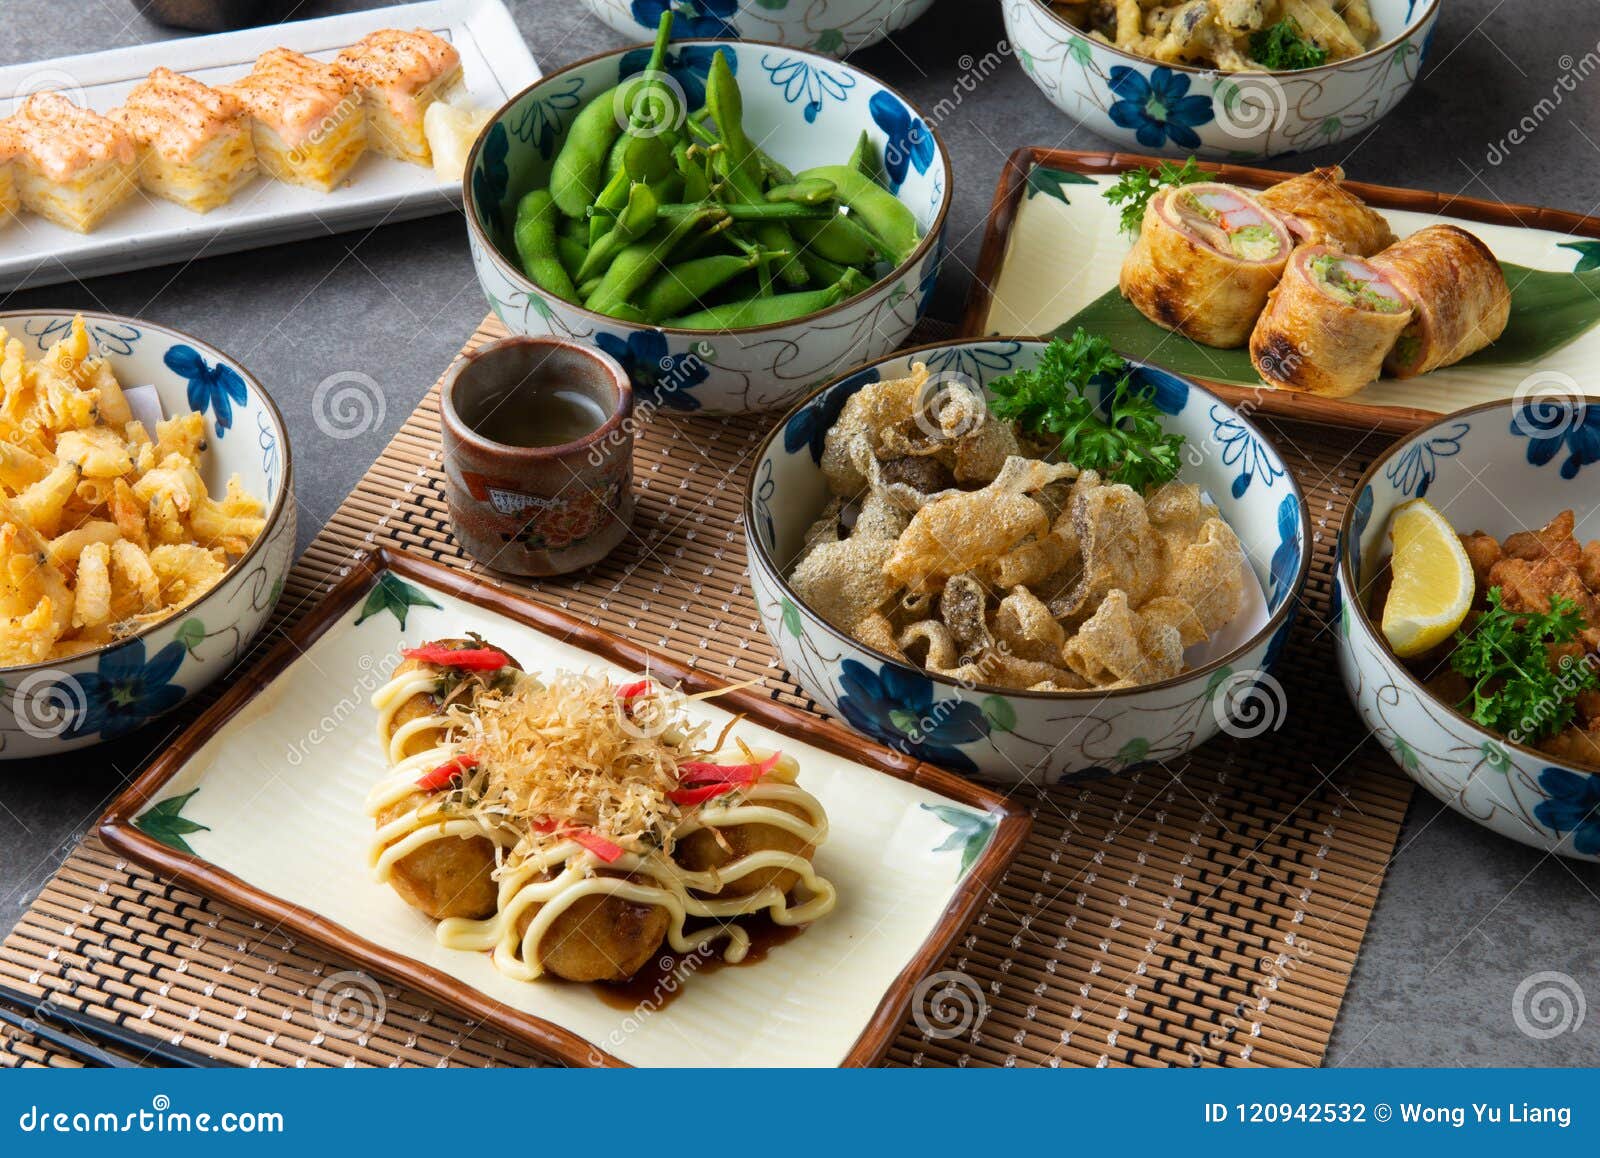 Japanese food served on the table. Japanese various food served on the table. with background